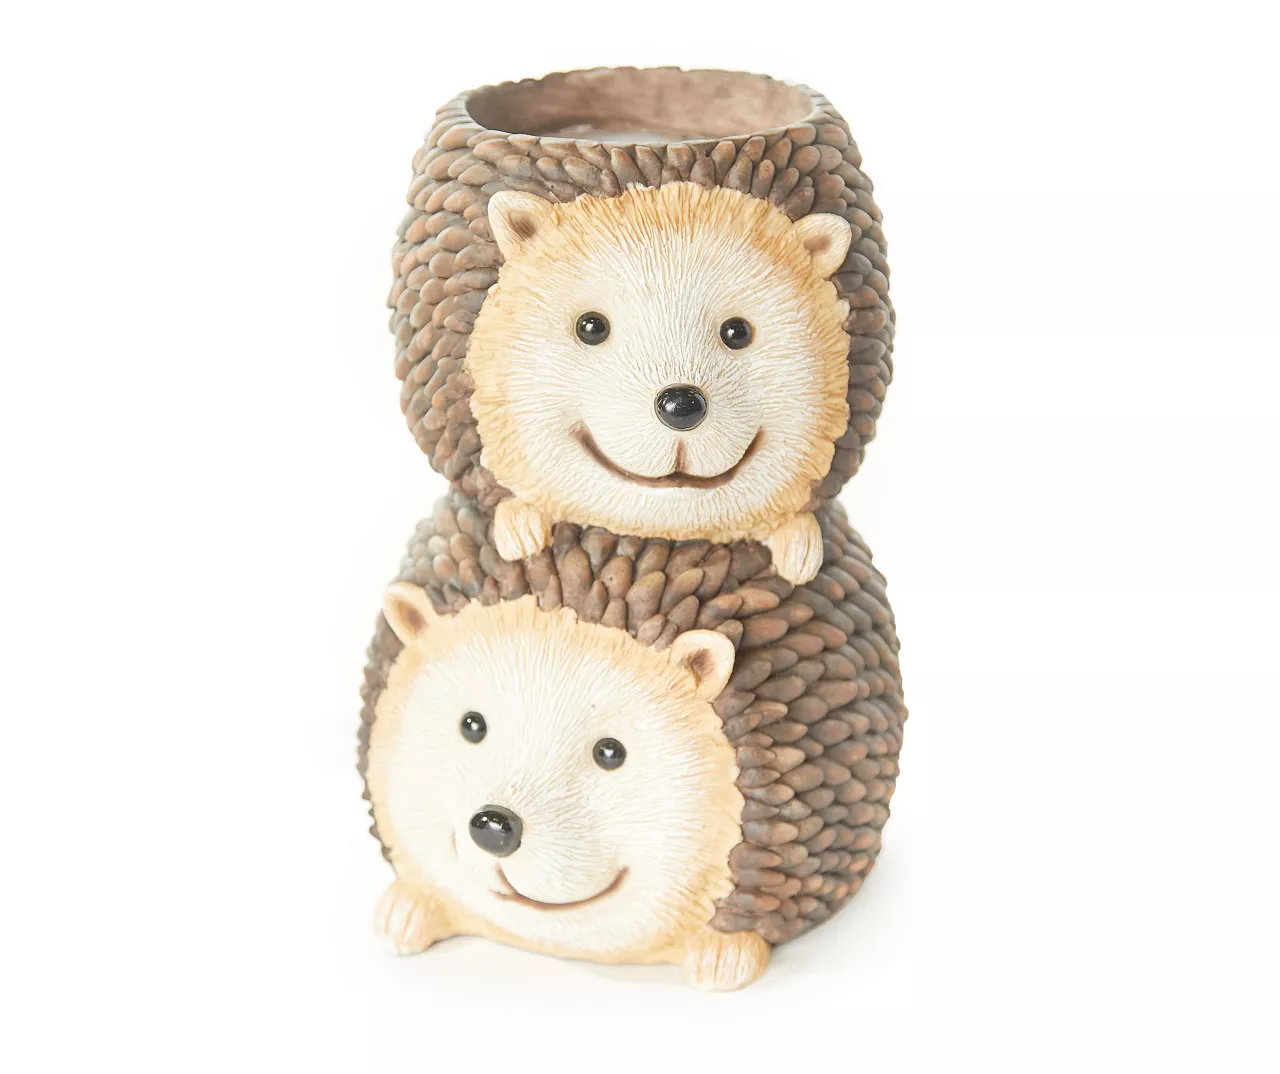 NEW Stacked Hedgehogs Polyresin Planter 9.5 inches tall brown &amp; tan in/o... - $12.95